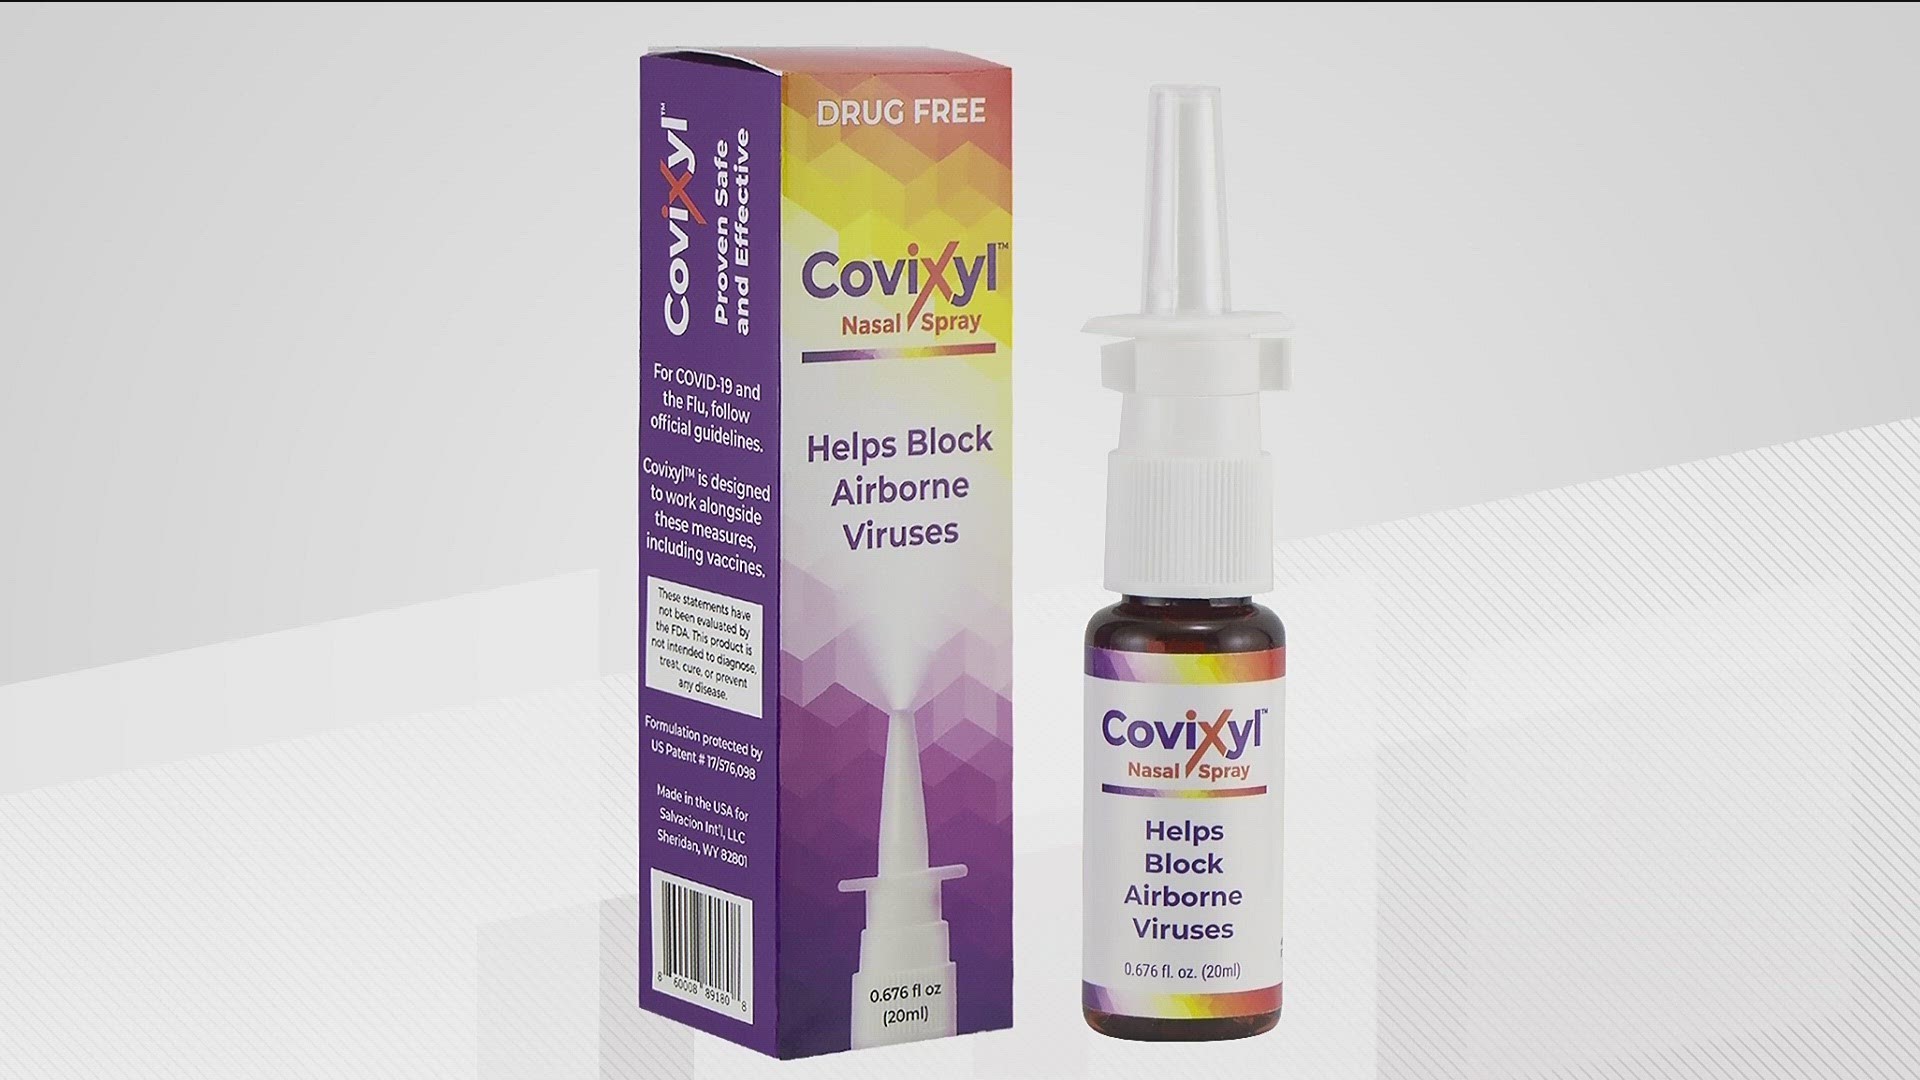 Makers of the nasal spray say it could protect you from COVID-19 for up to six hours and is being sold over the counter.